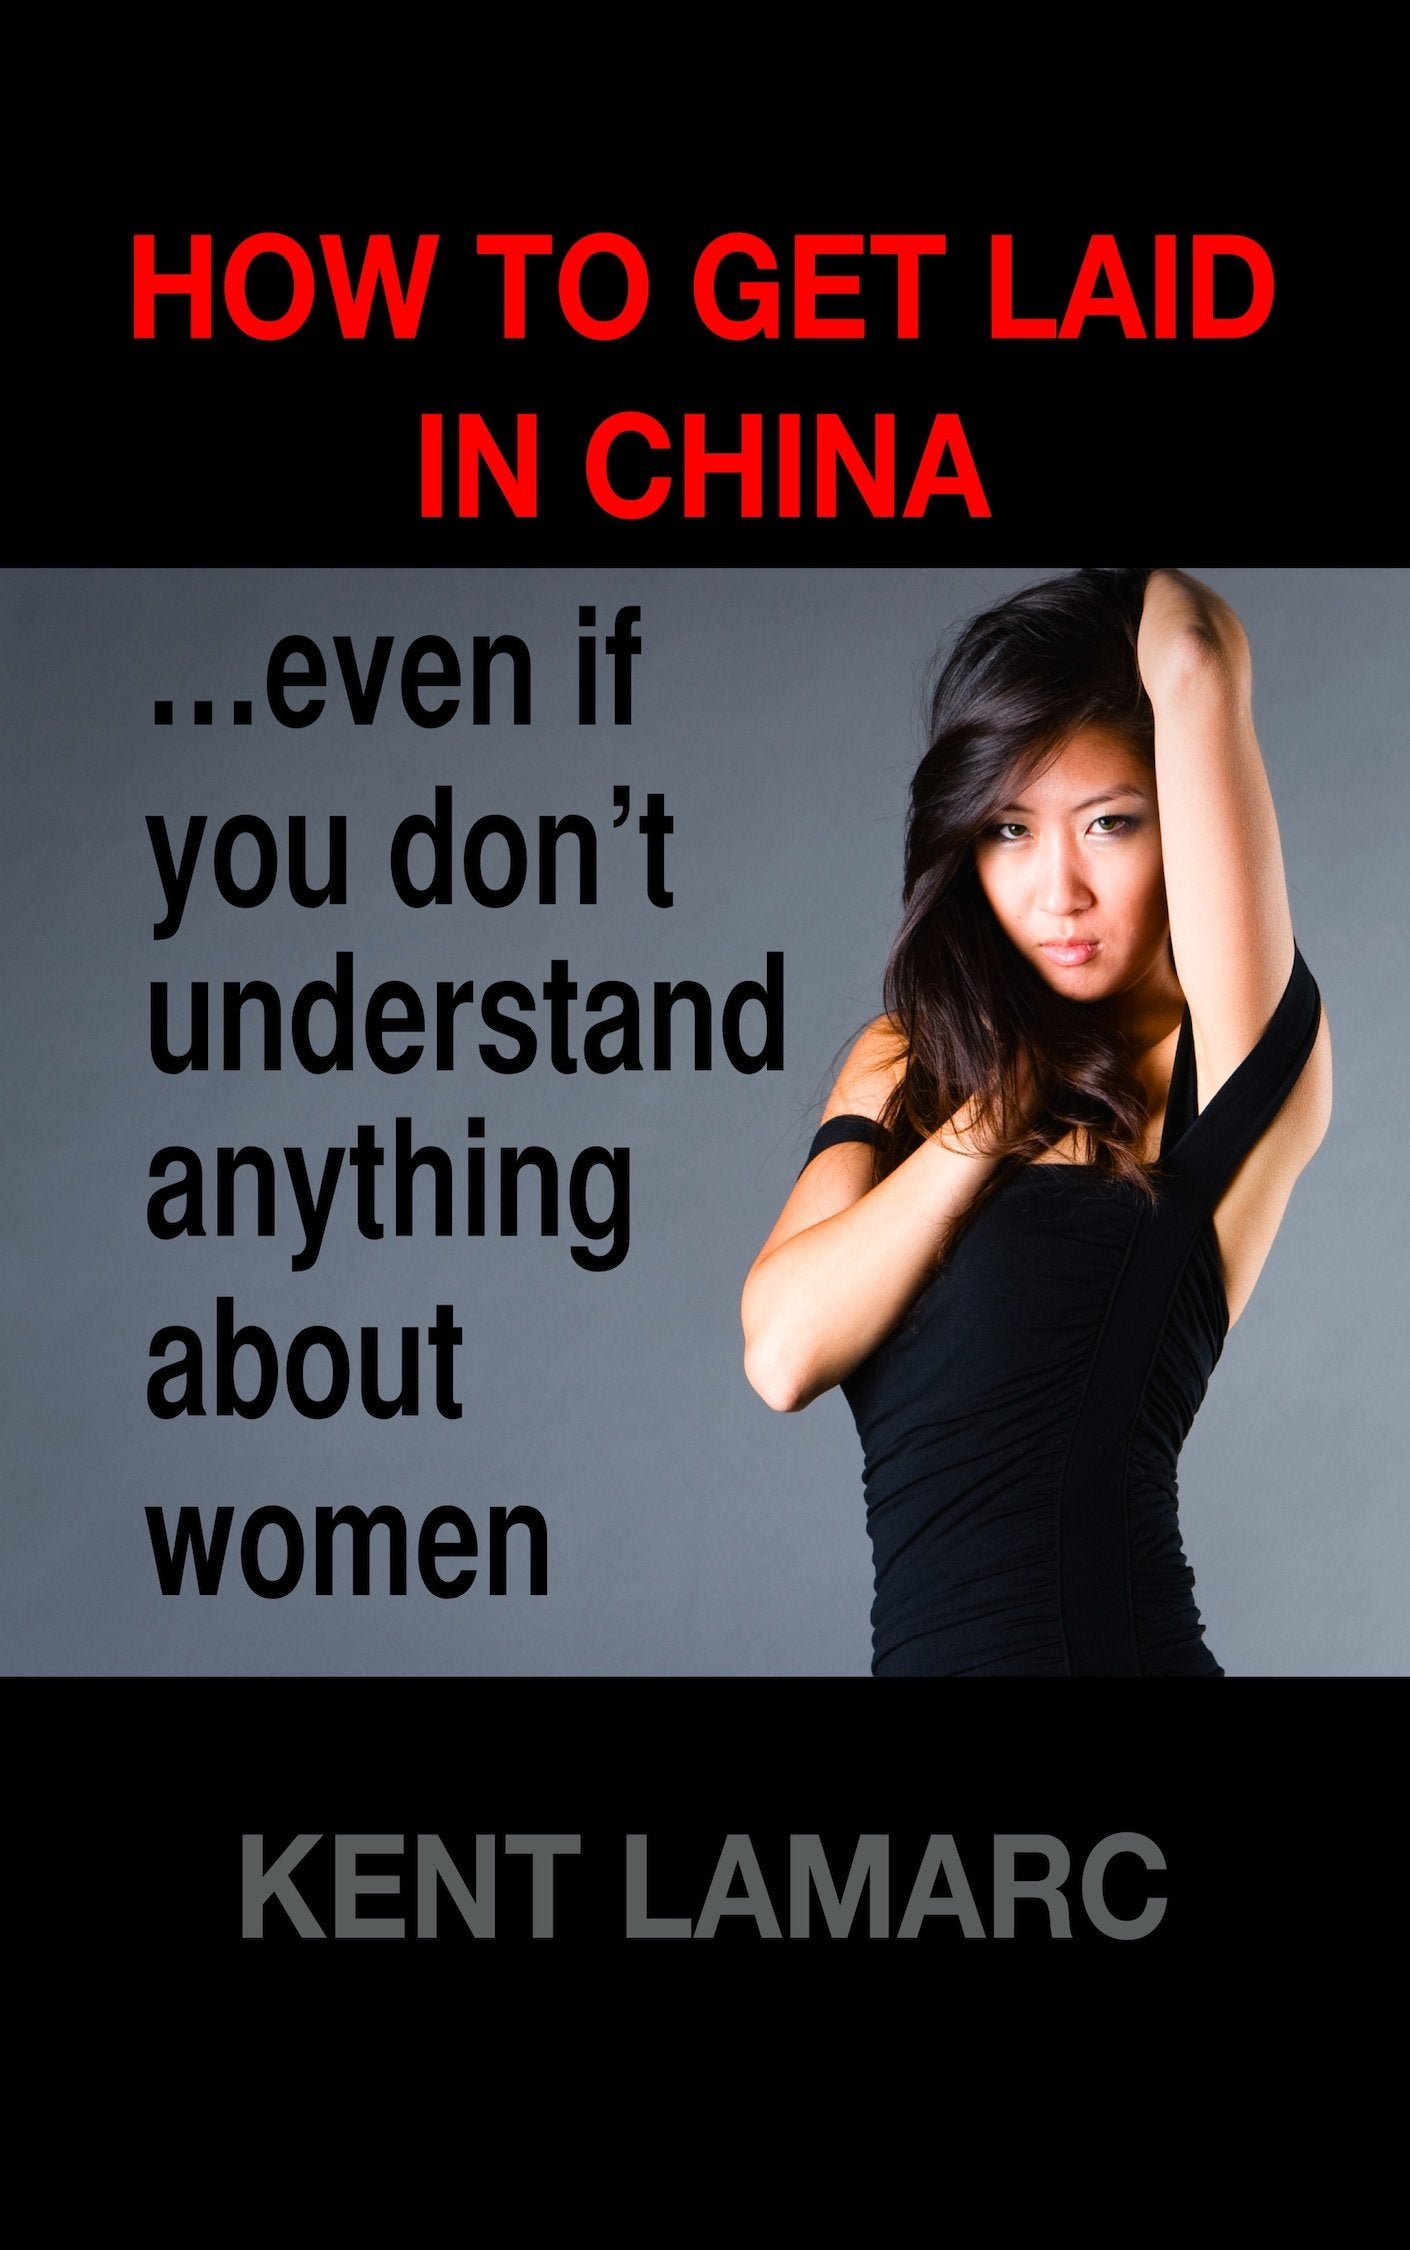 How to Get Laid in China